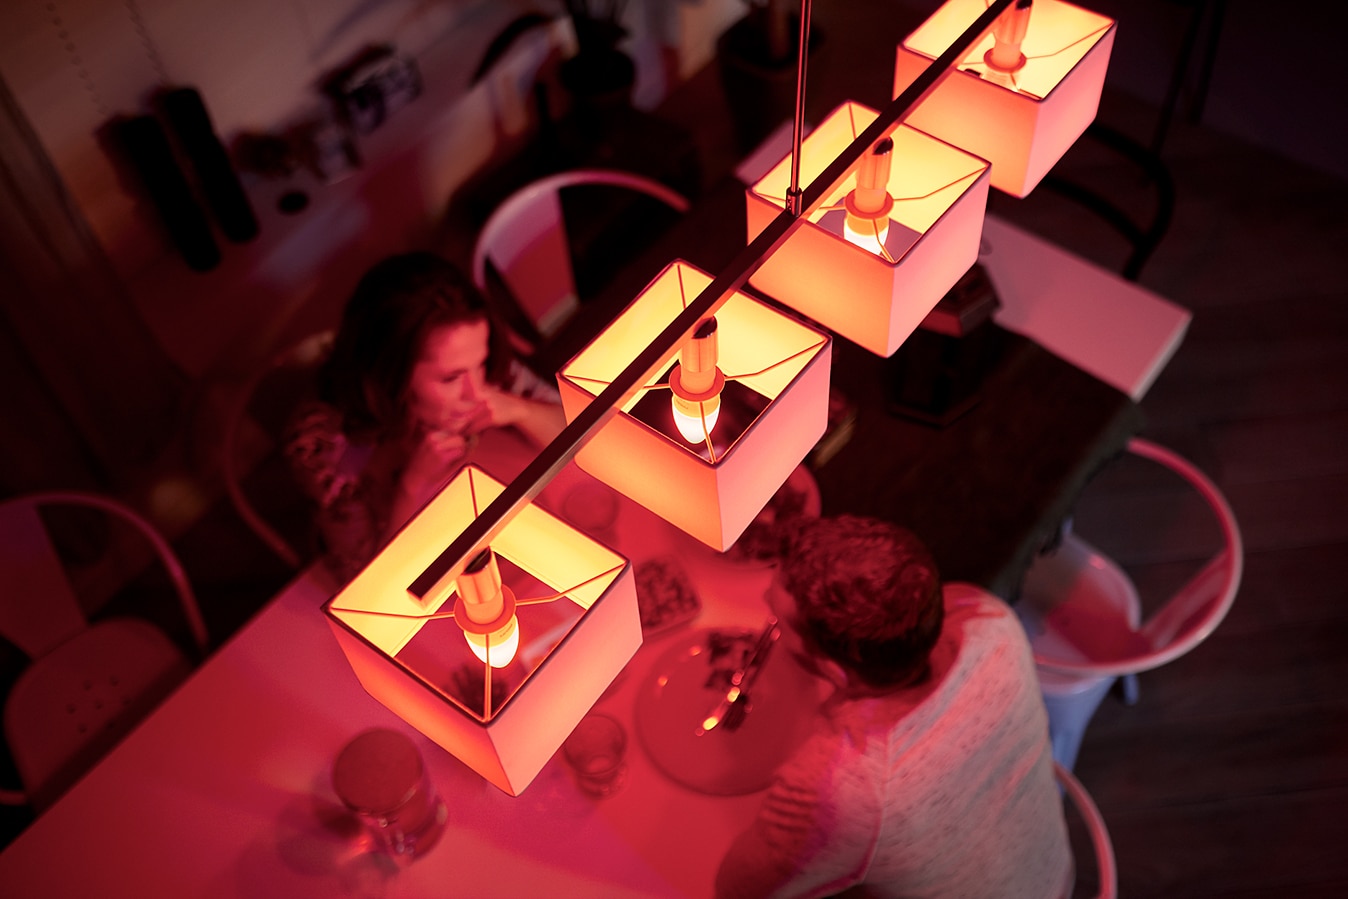 Bring your candle-lit dinner into the 21st with the new Philips Hue E14 candle! - Philips Lighting